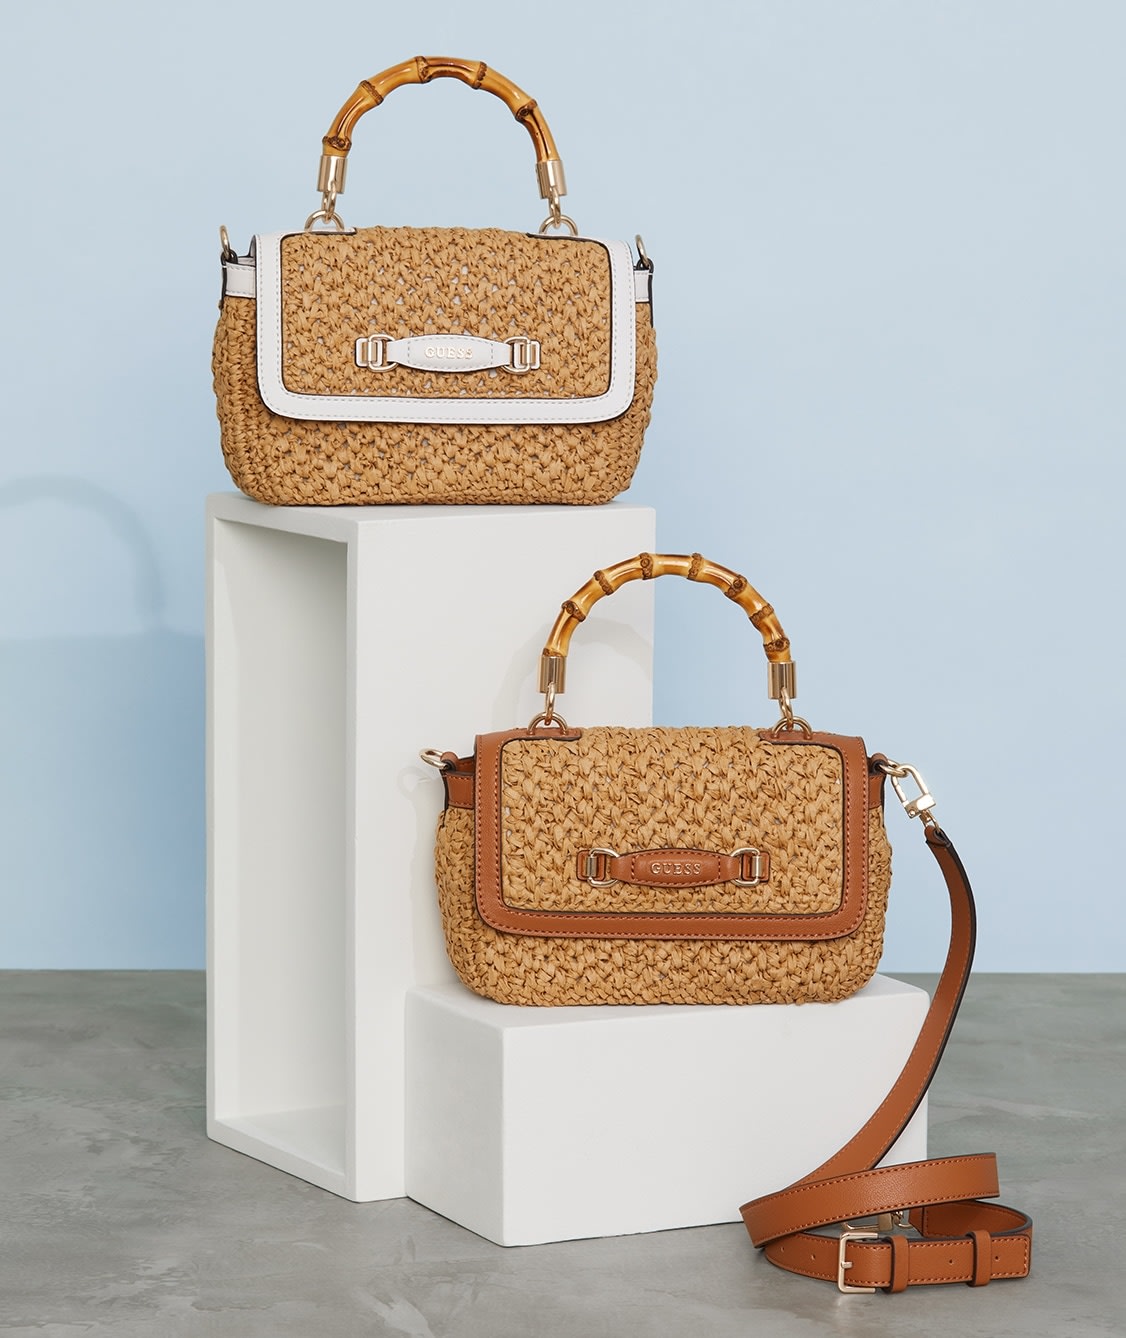 Shop the It-Bag featuring bamboo and wicker.